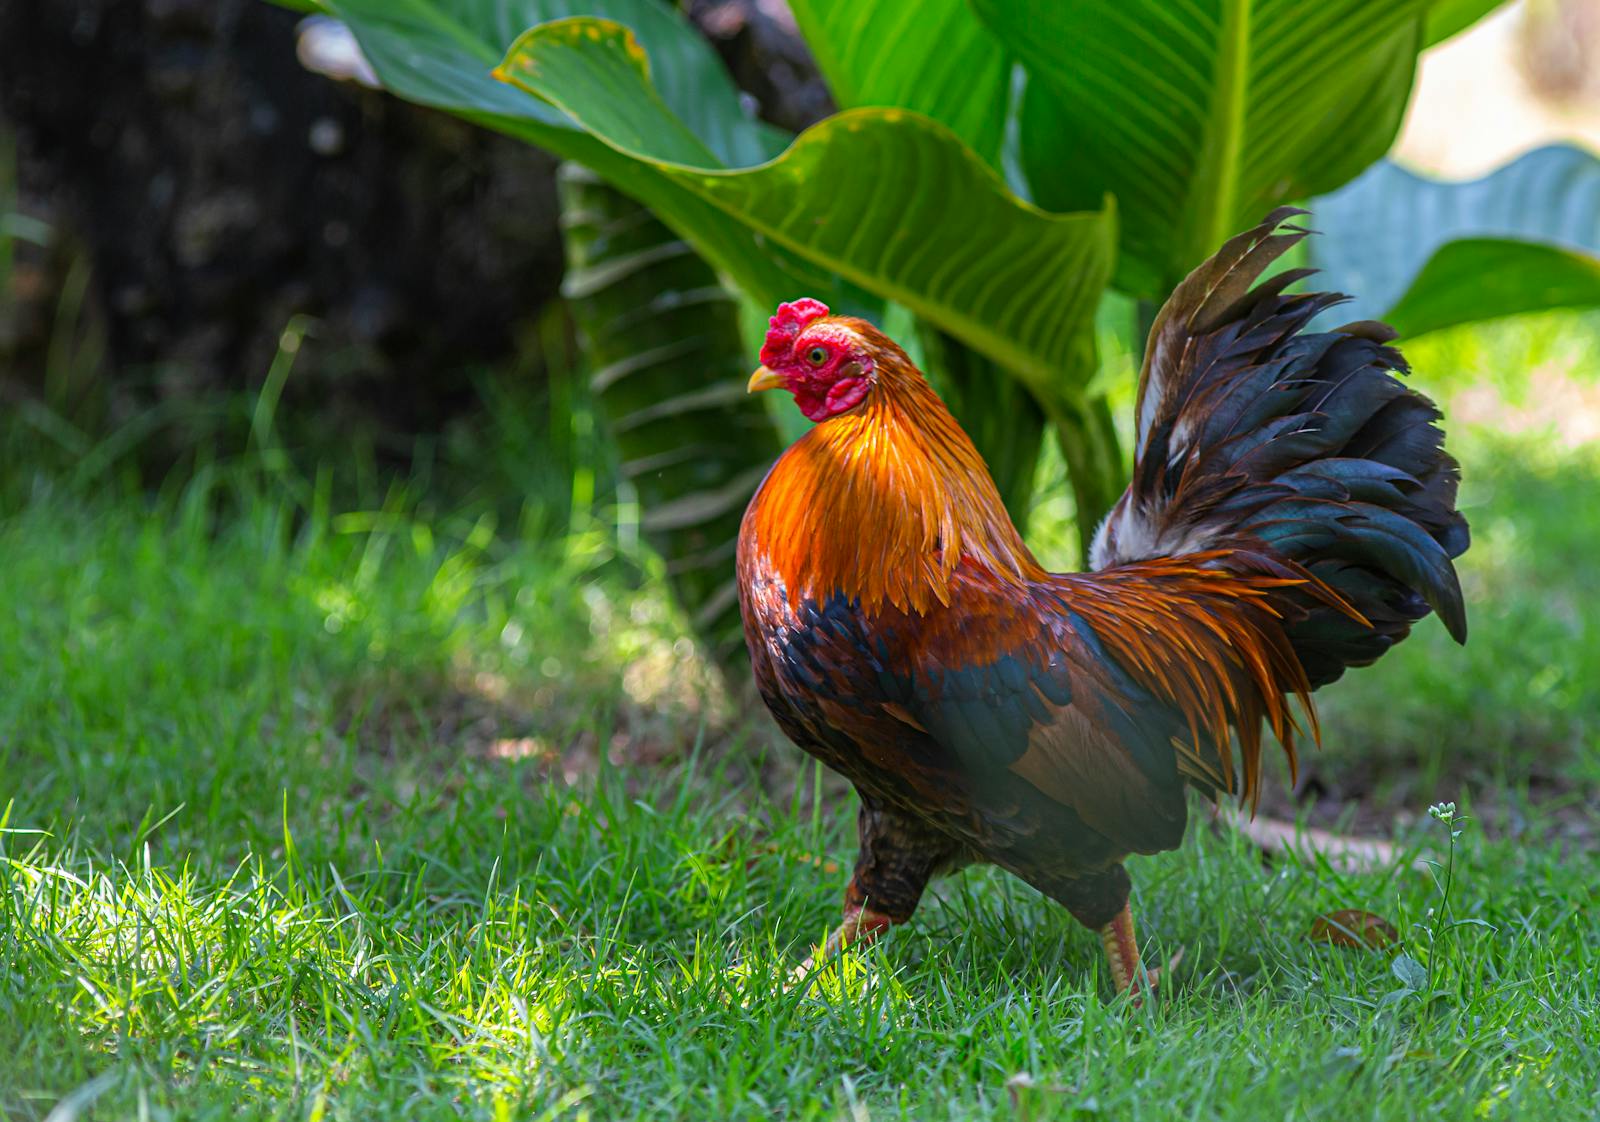 Happy Year of the Rooster - From All of us at the Bettina Reid Group